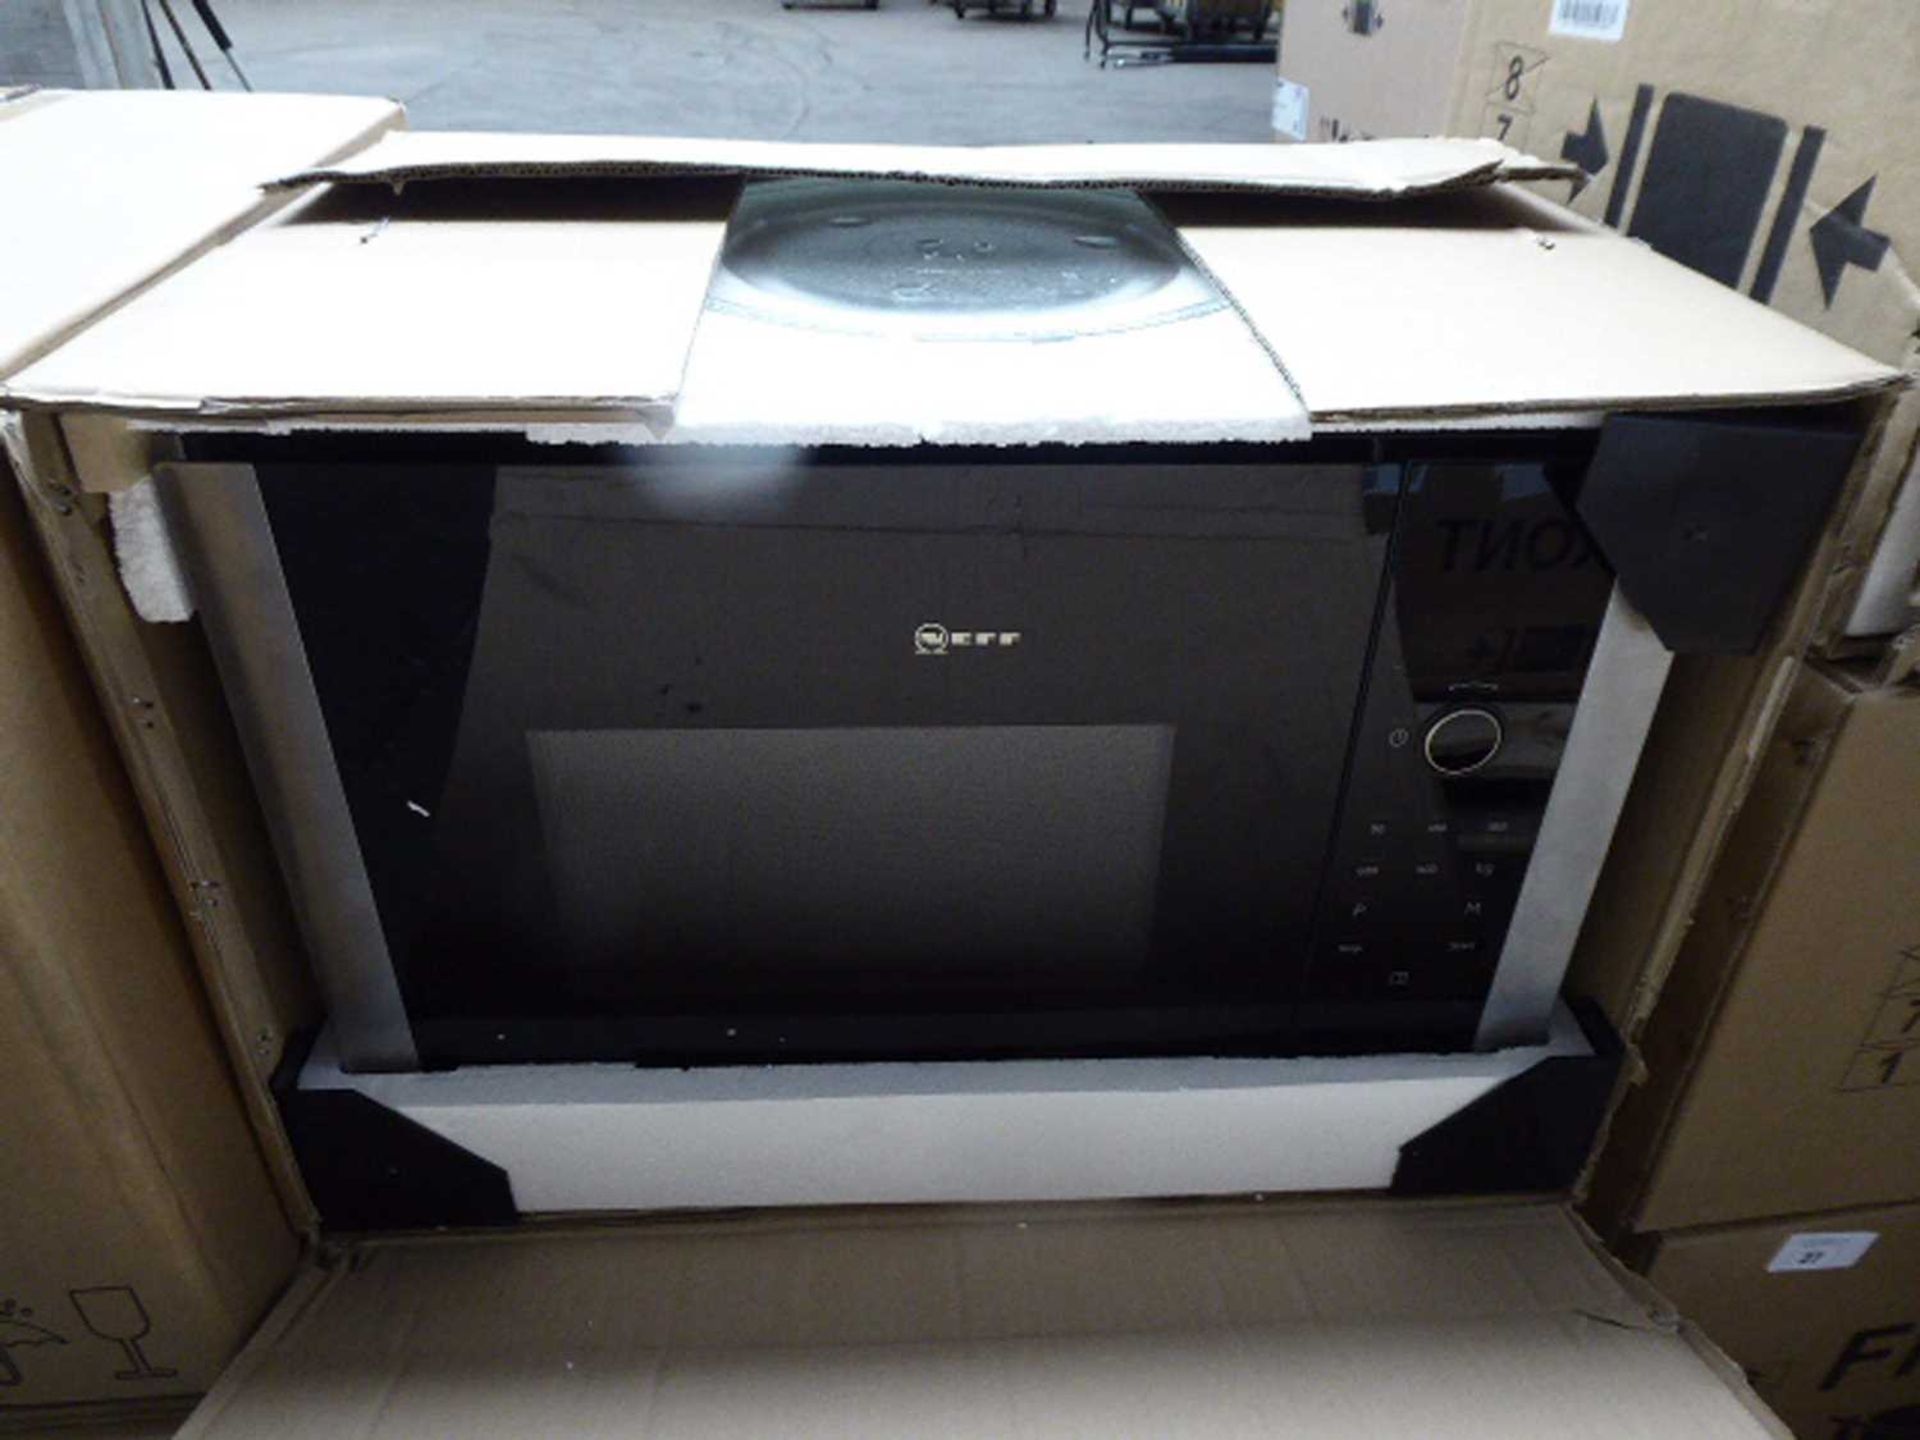 +VAT HLAWD53N0BB - Neff - Built-in microwave oven